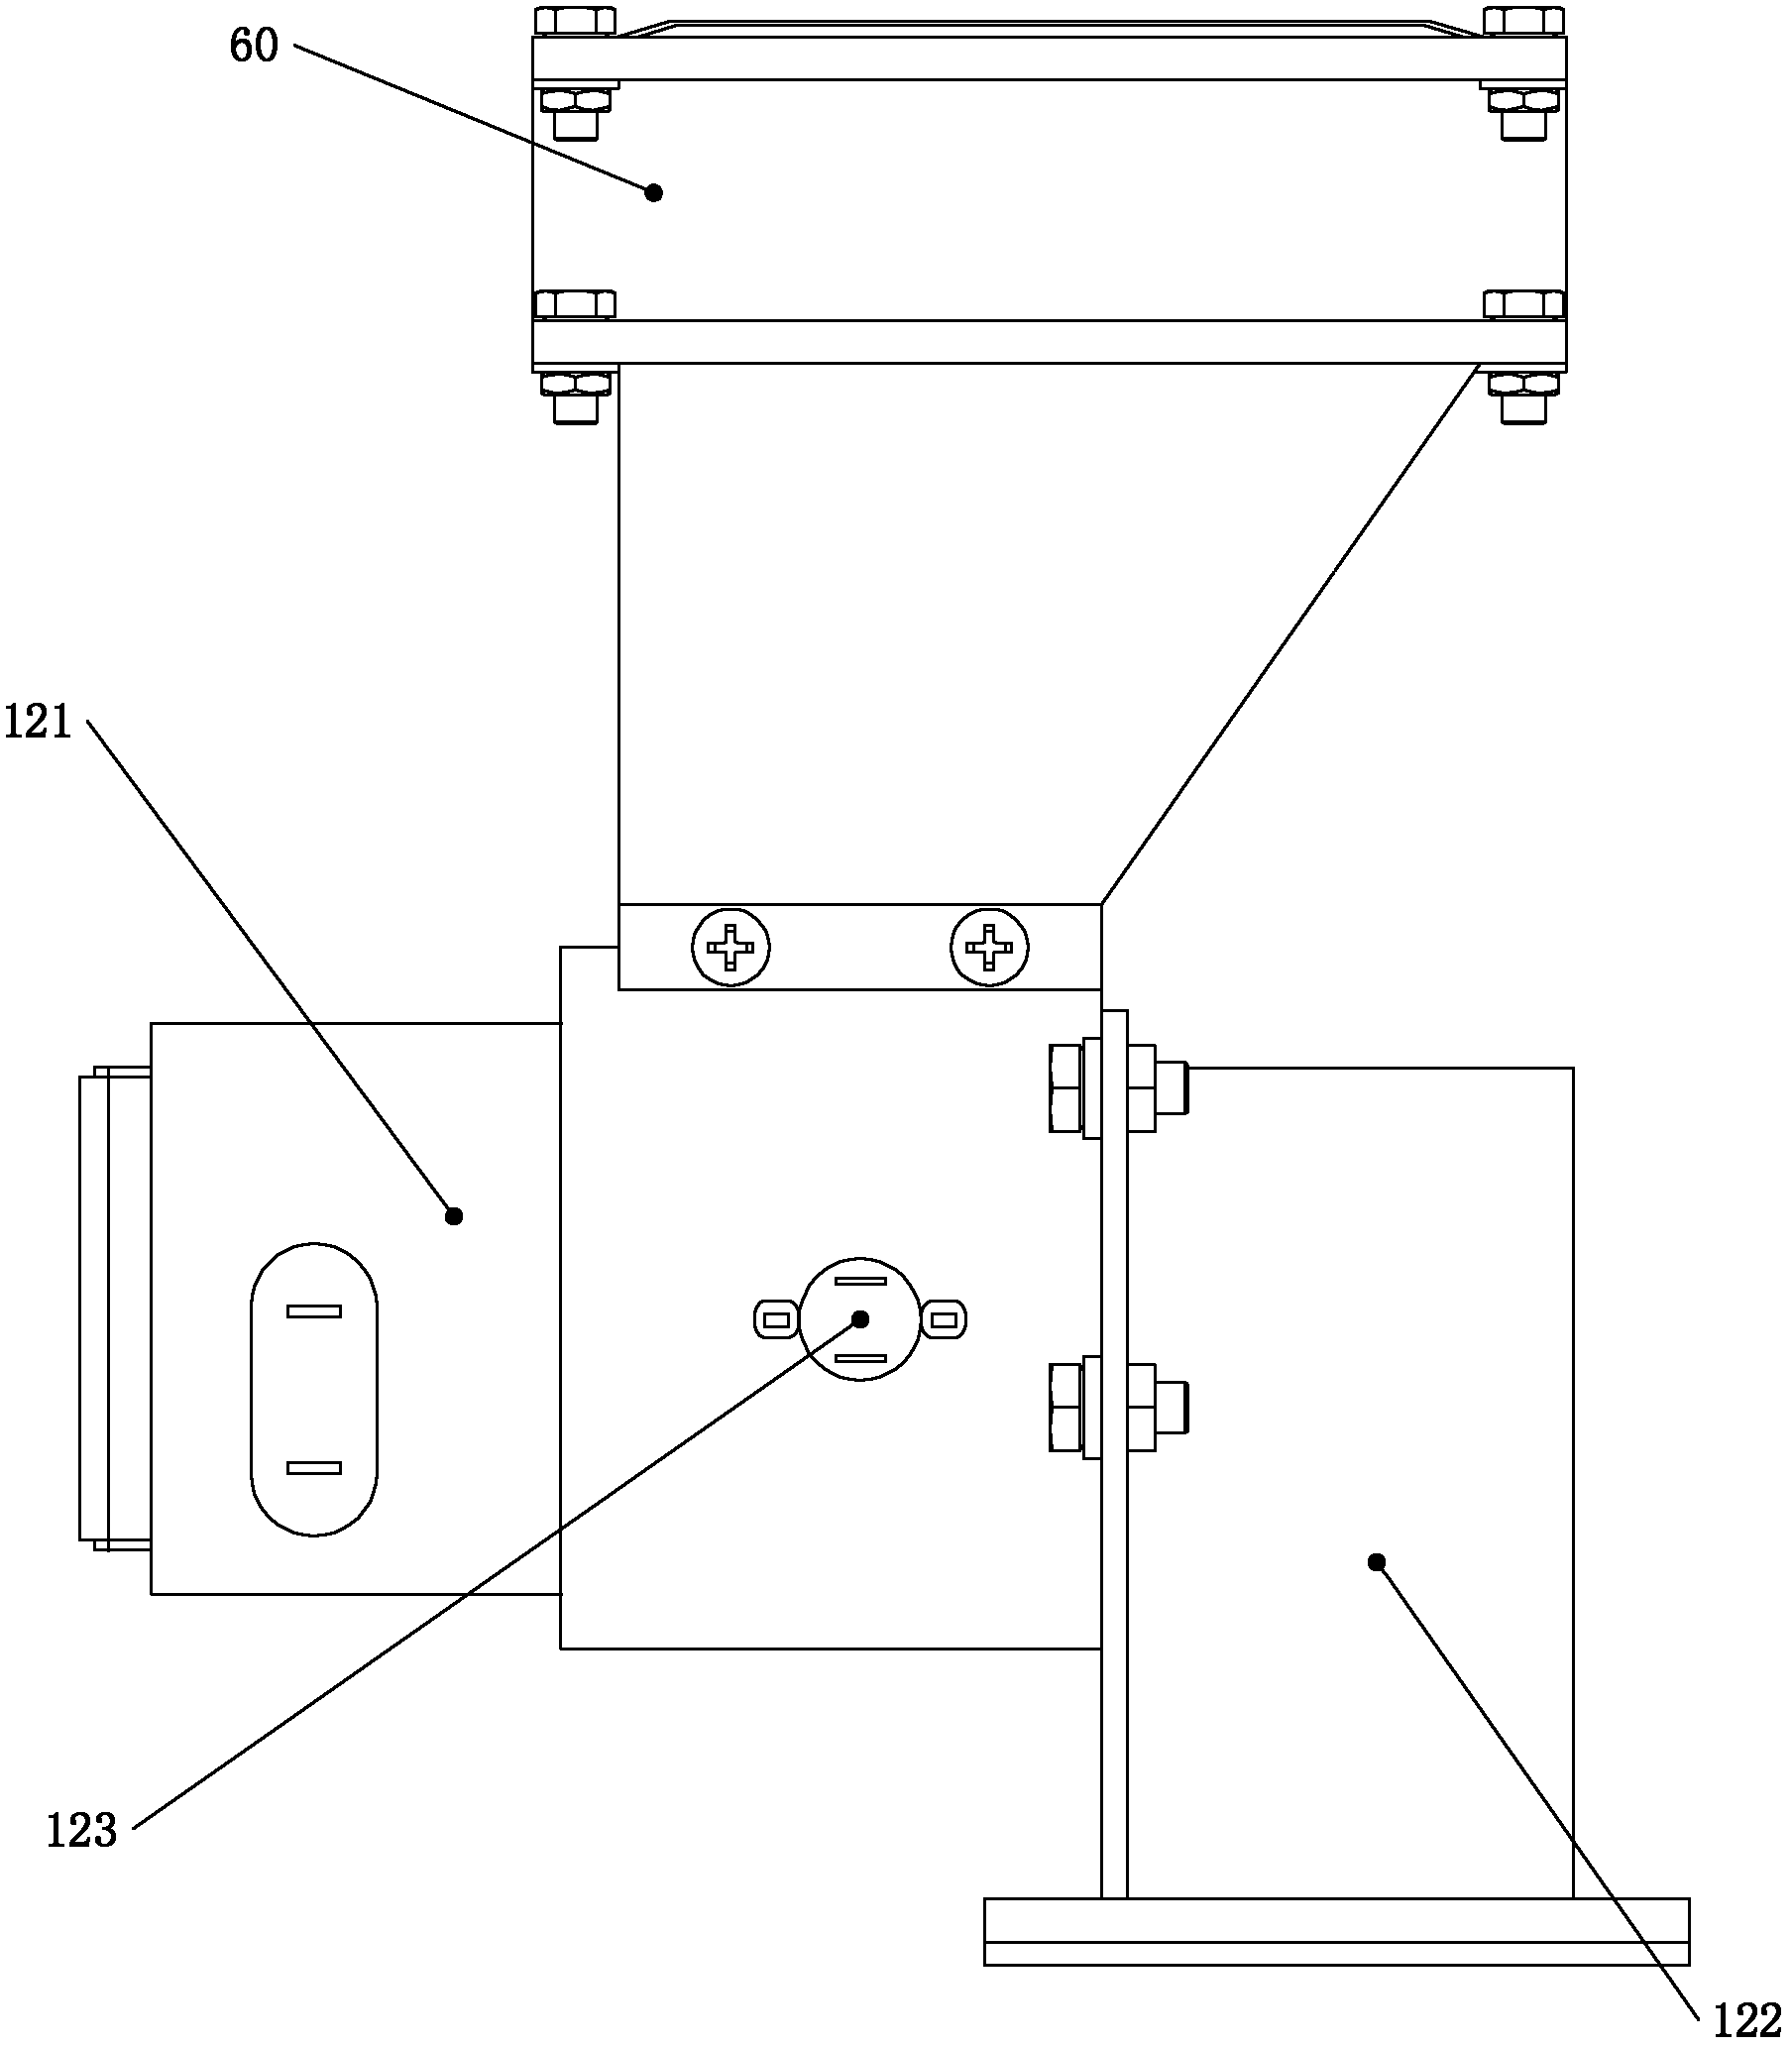 Equipment and method for drying gypsum boards